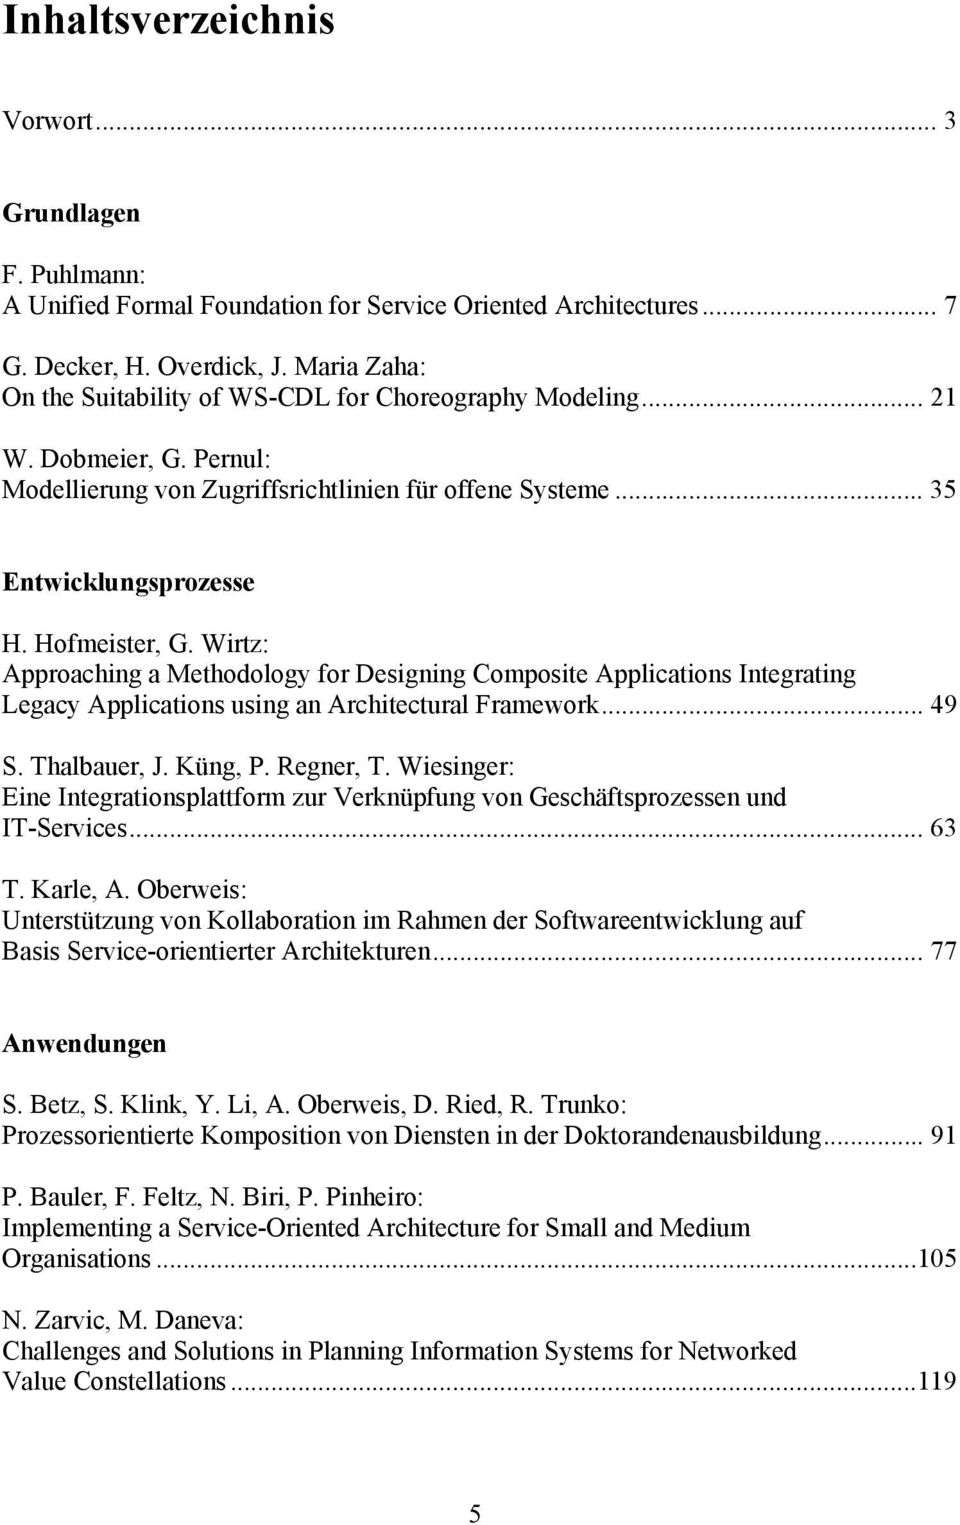 Wirtz: Approaching amethodology fordesigningcomposite Applications Integrating Legacy Applications using an Architectural Framework... 49 S. Thalbauer, J. Küng, P. Regner, T.